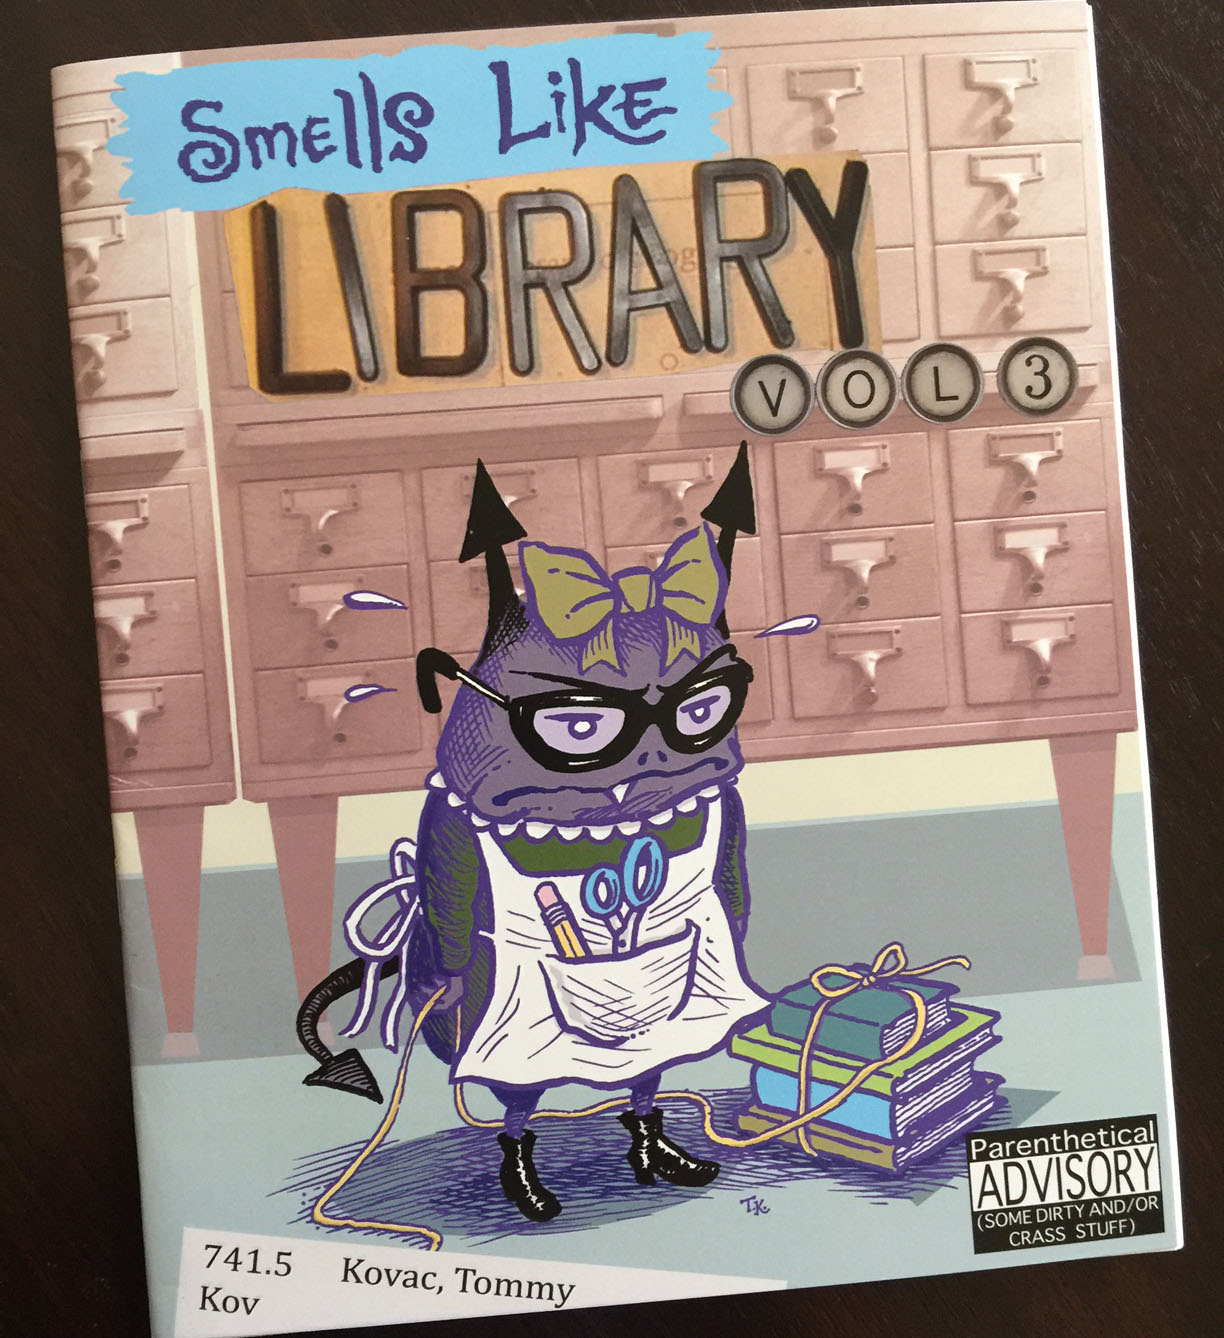 Smells Like Library Vol.3